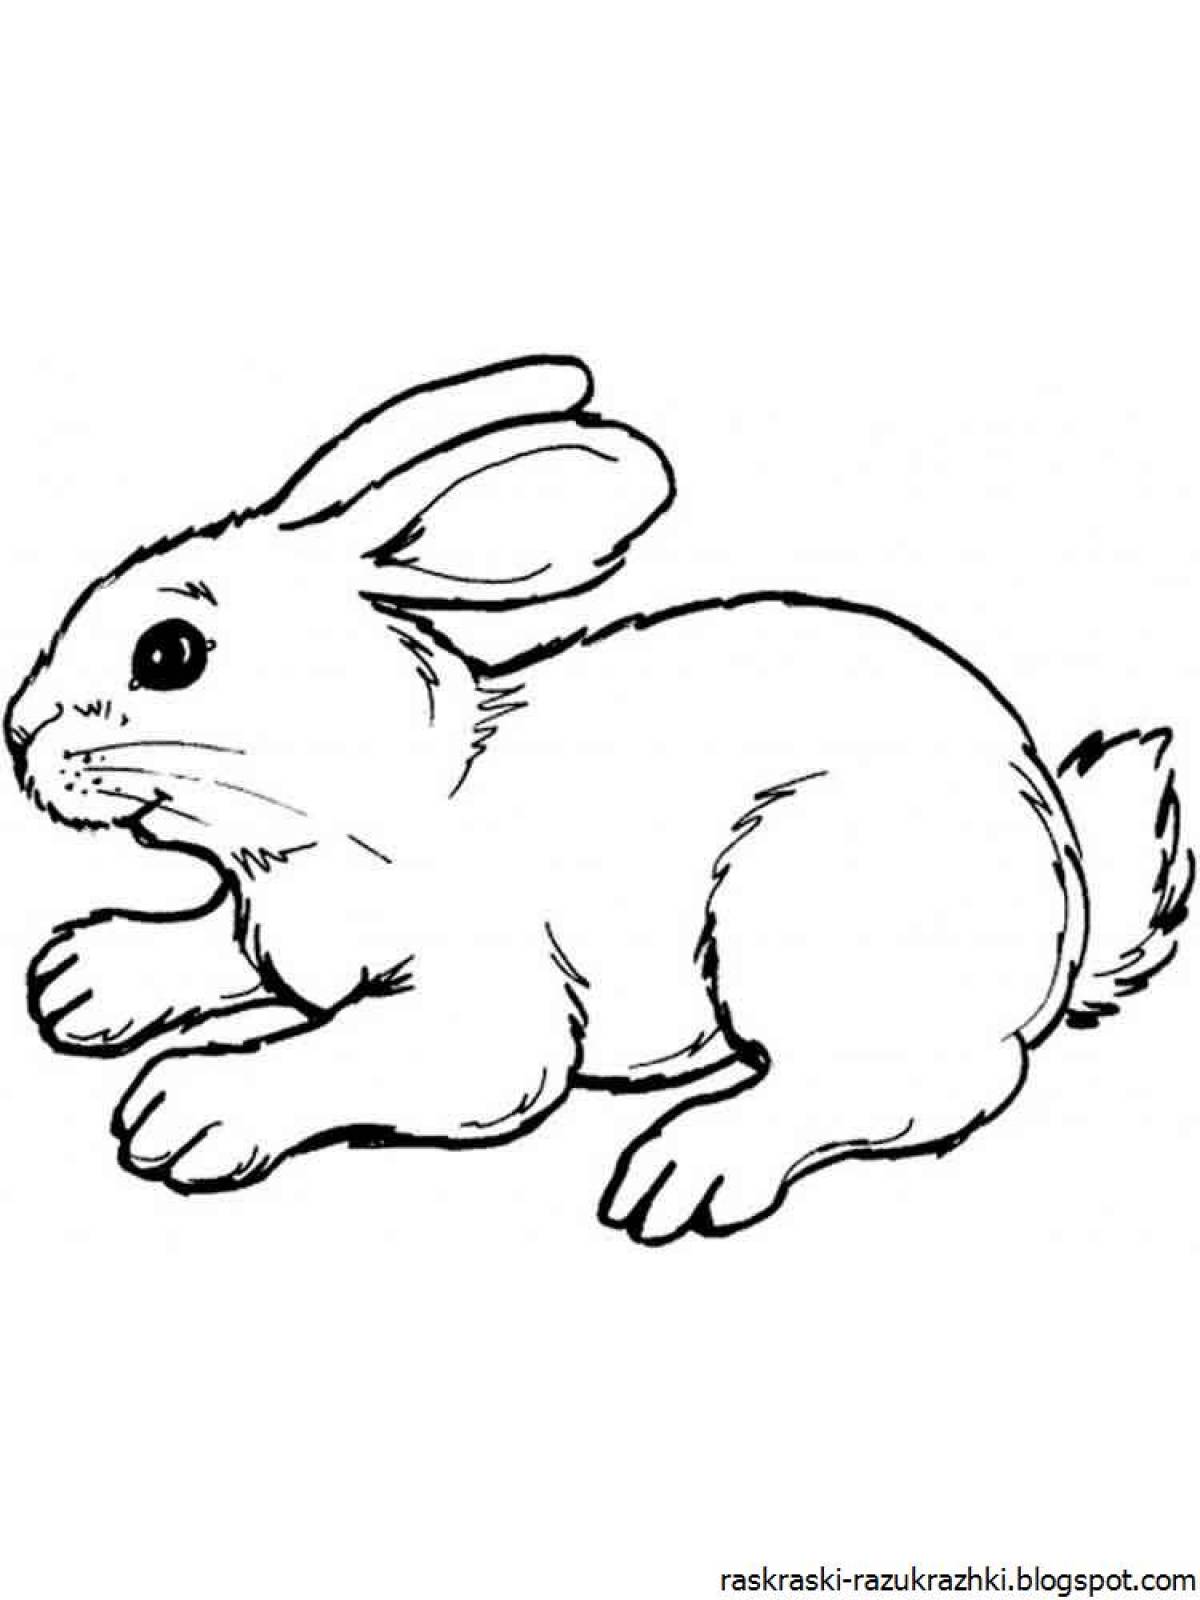 Joyful coloring hare picture for children